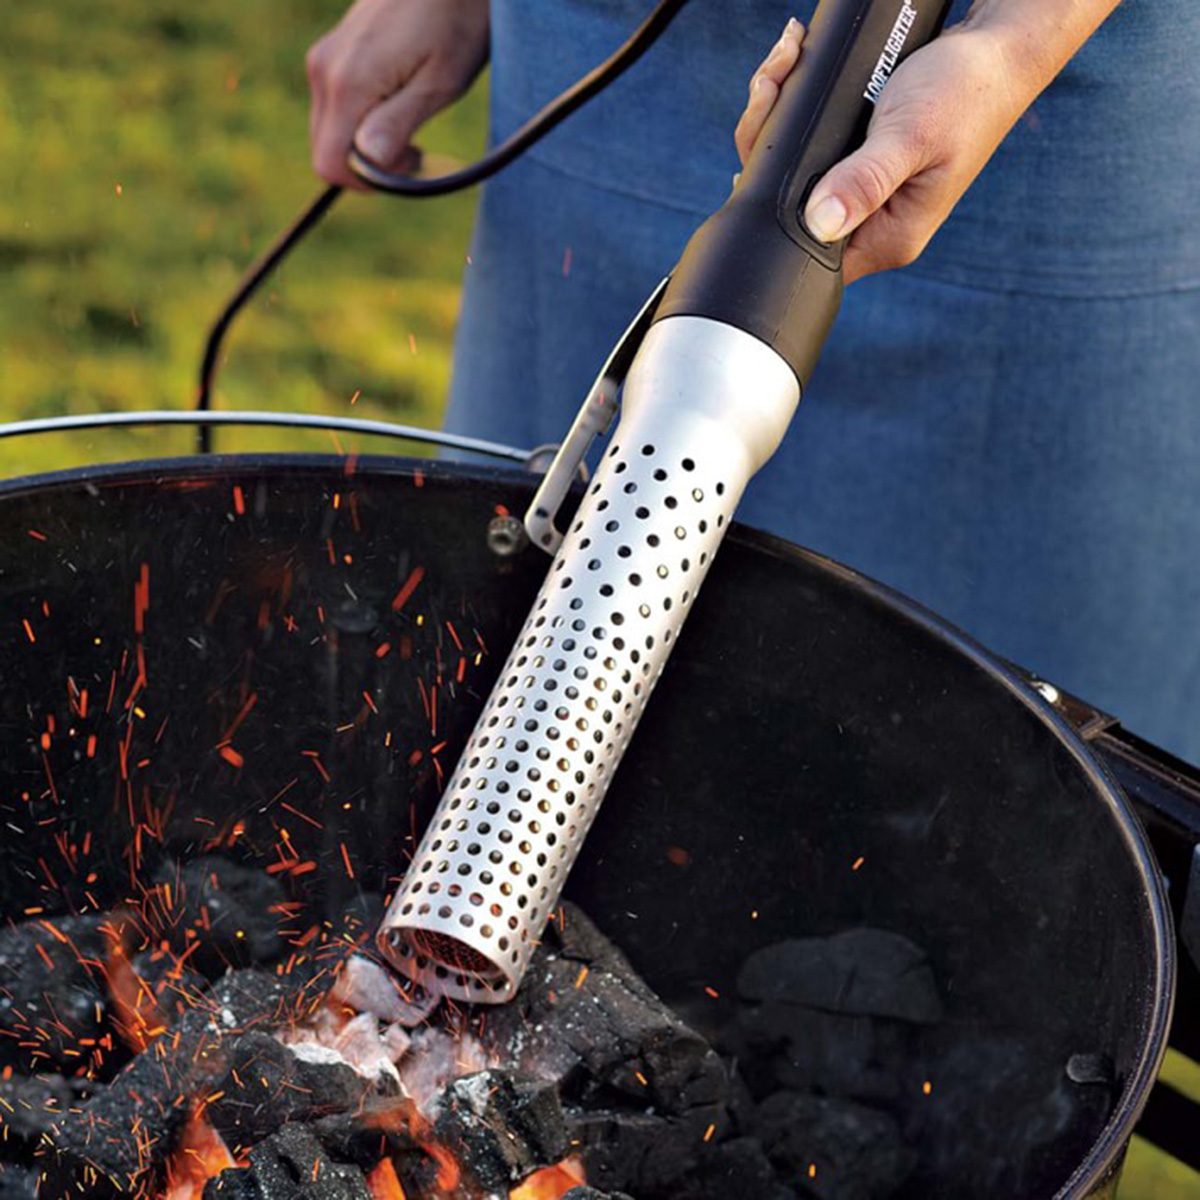 Using an electric starter on a charcoal grill